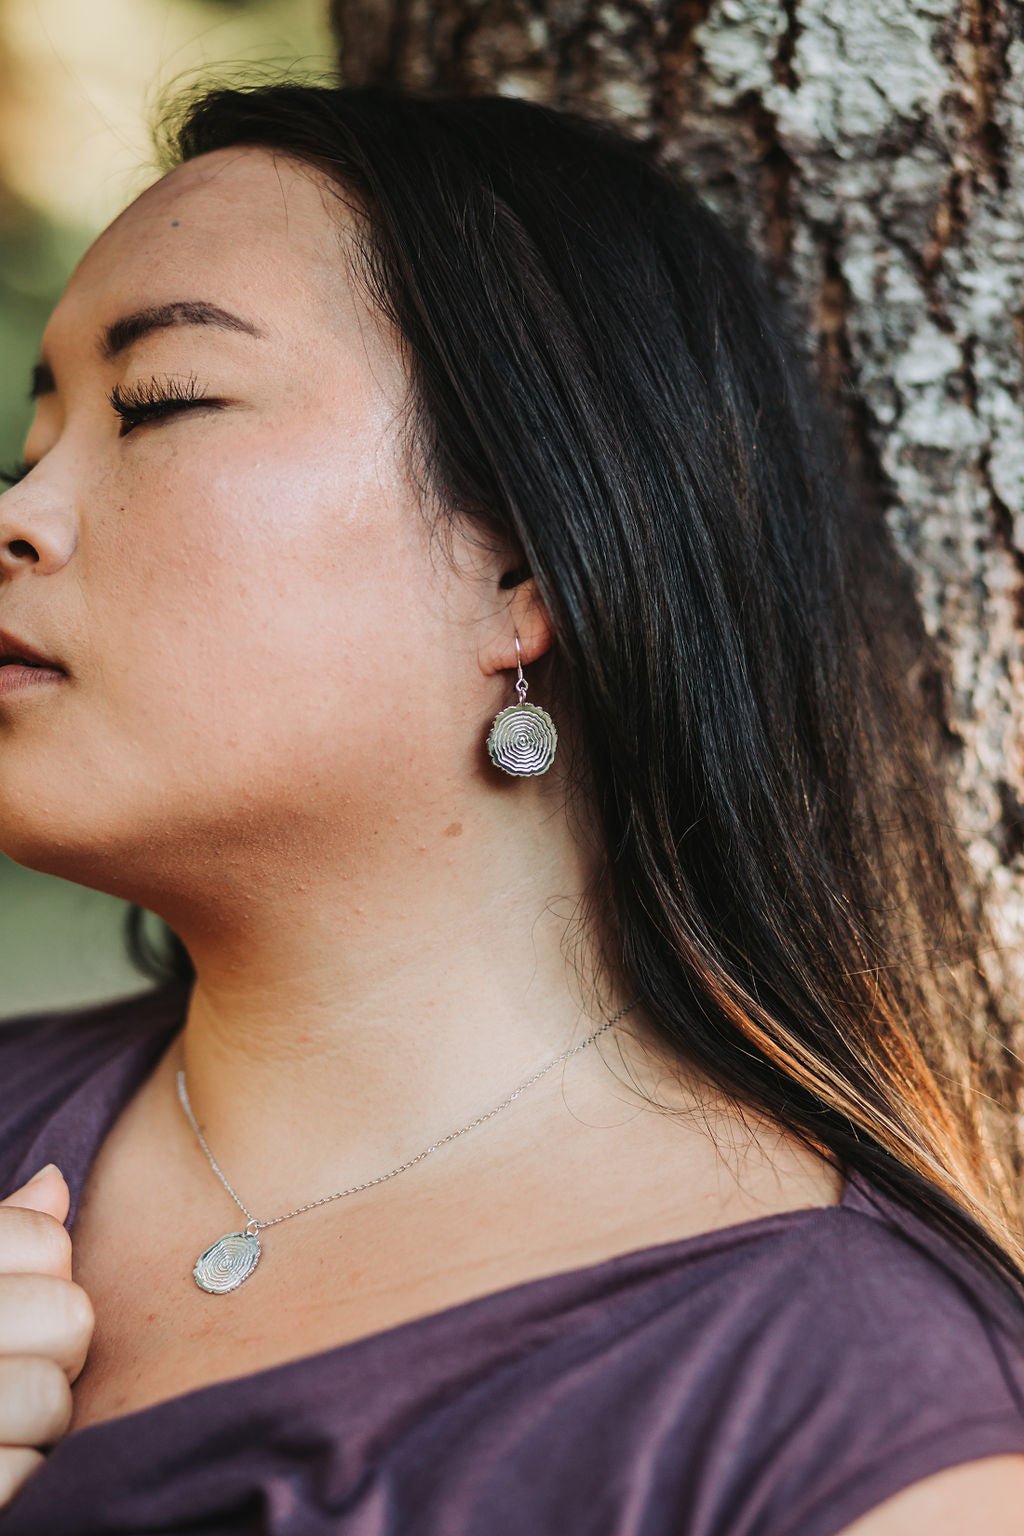 model wearing sterling silver Matsuyo tree ring earrings and necklace